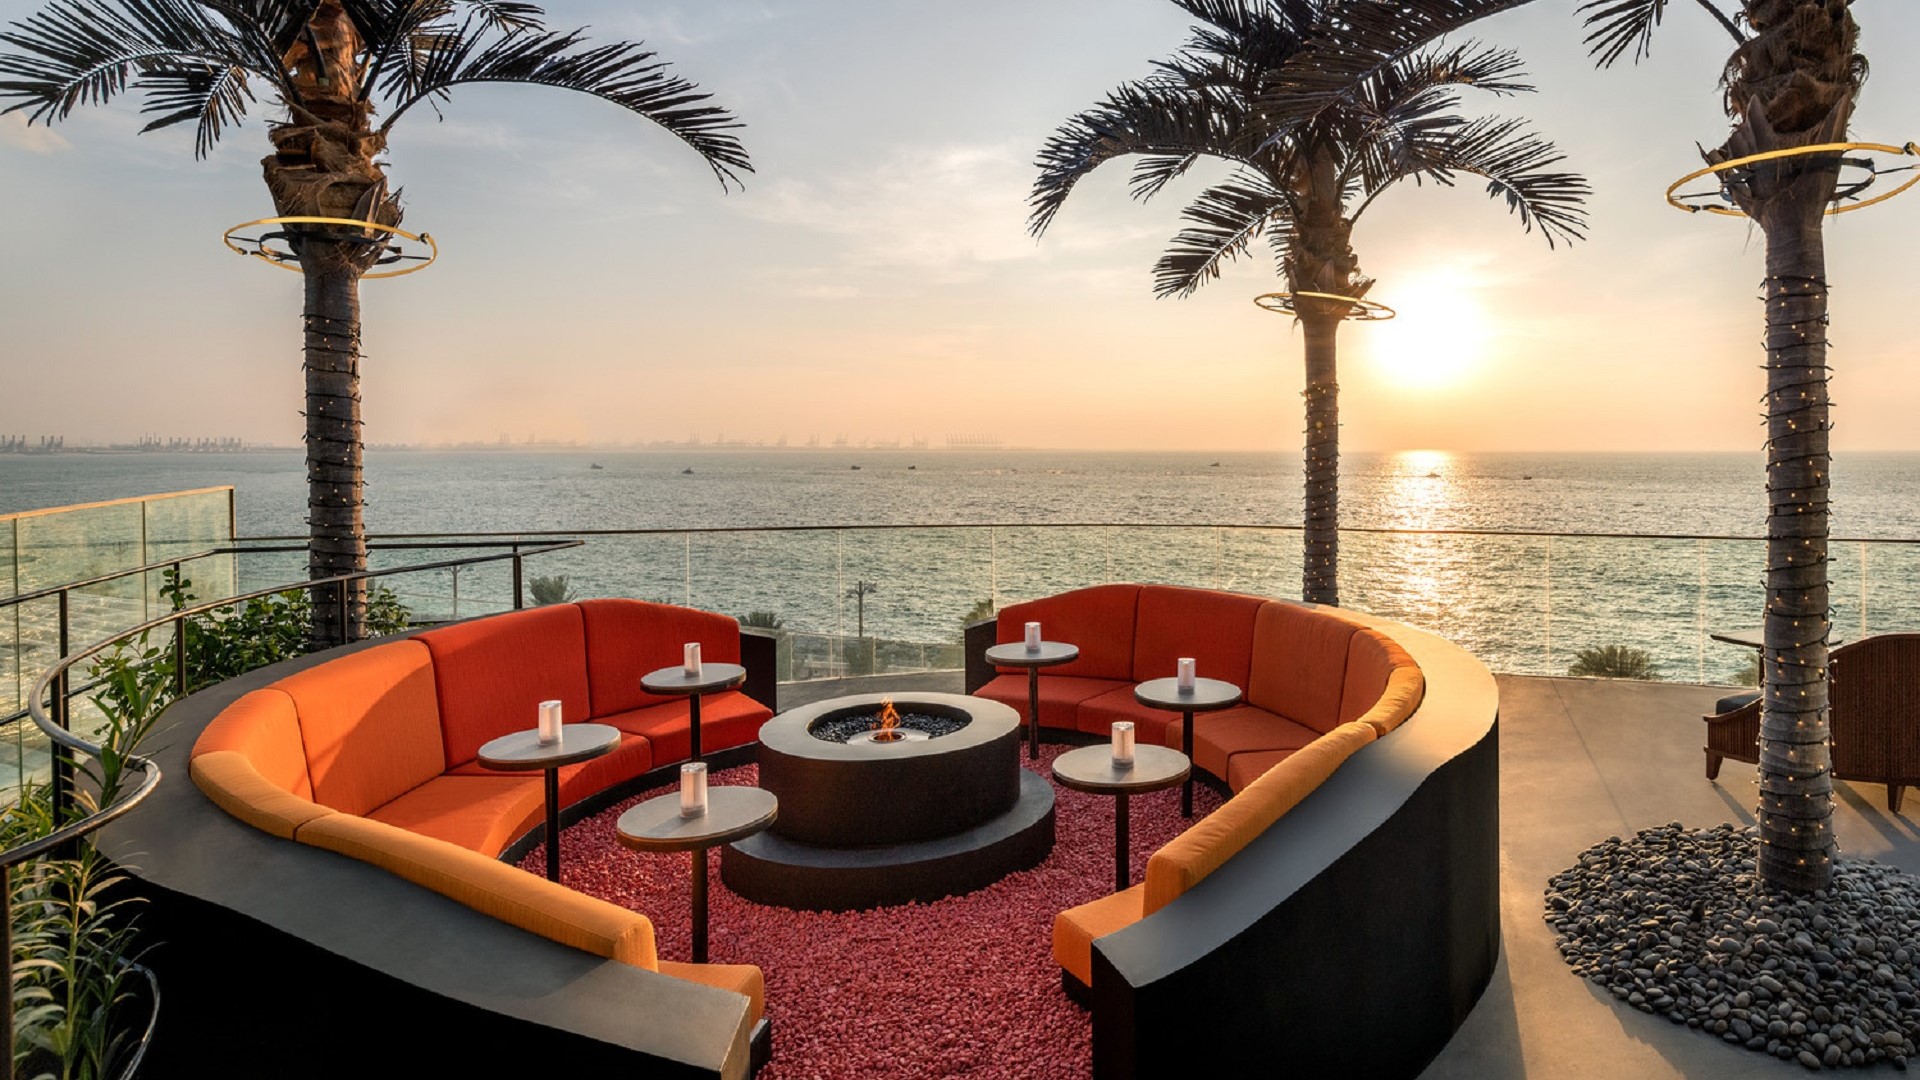 outdoor seating and palm trees overlooking water on Palm Jumiera Island; SoBe Dubai bar